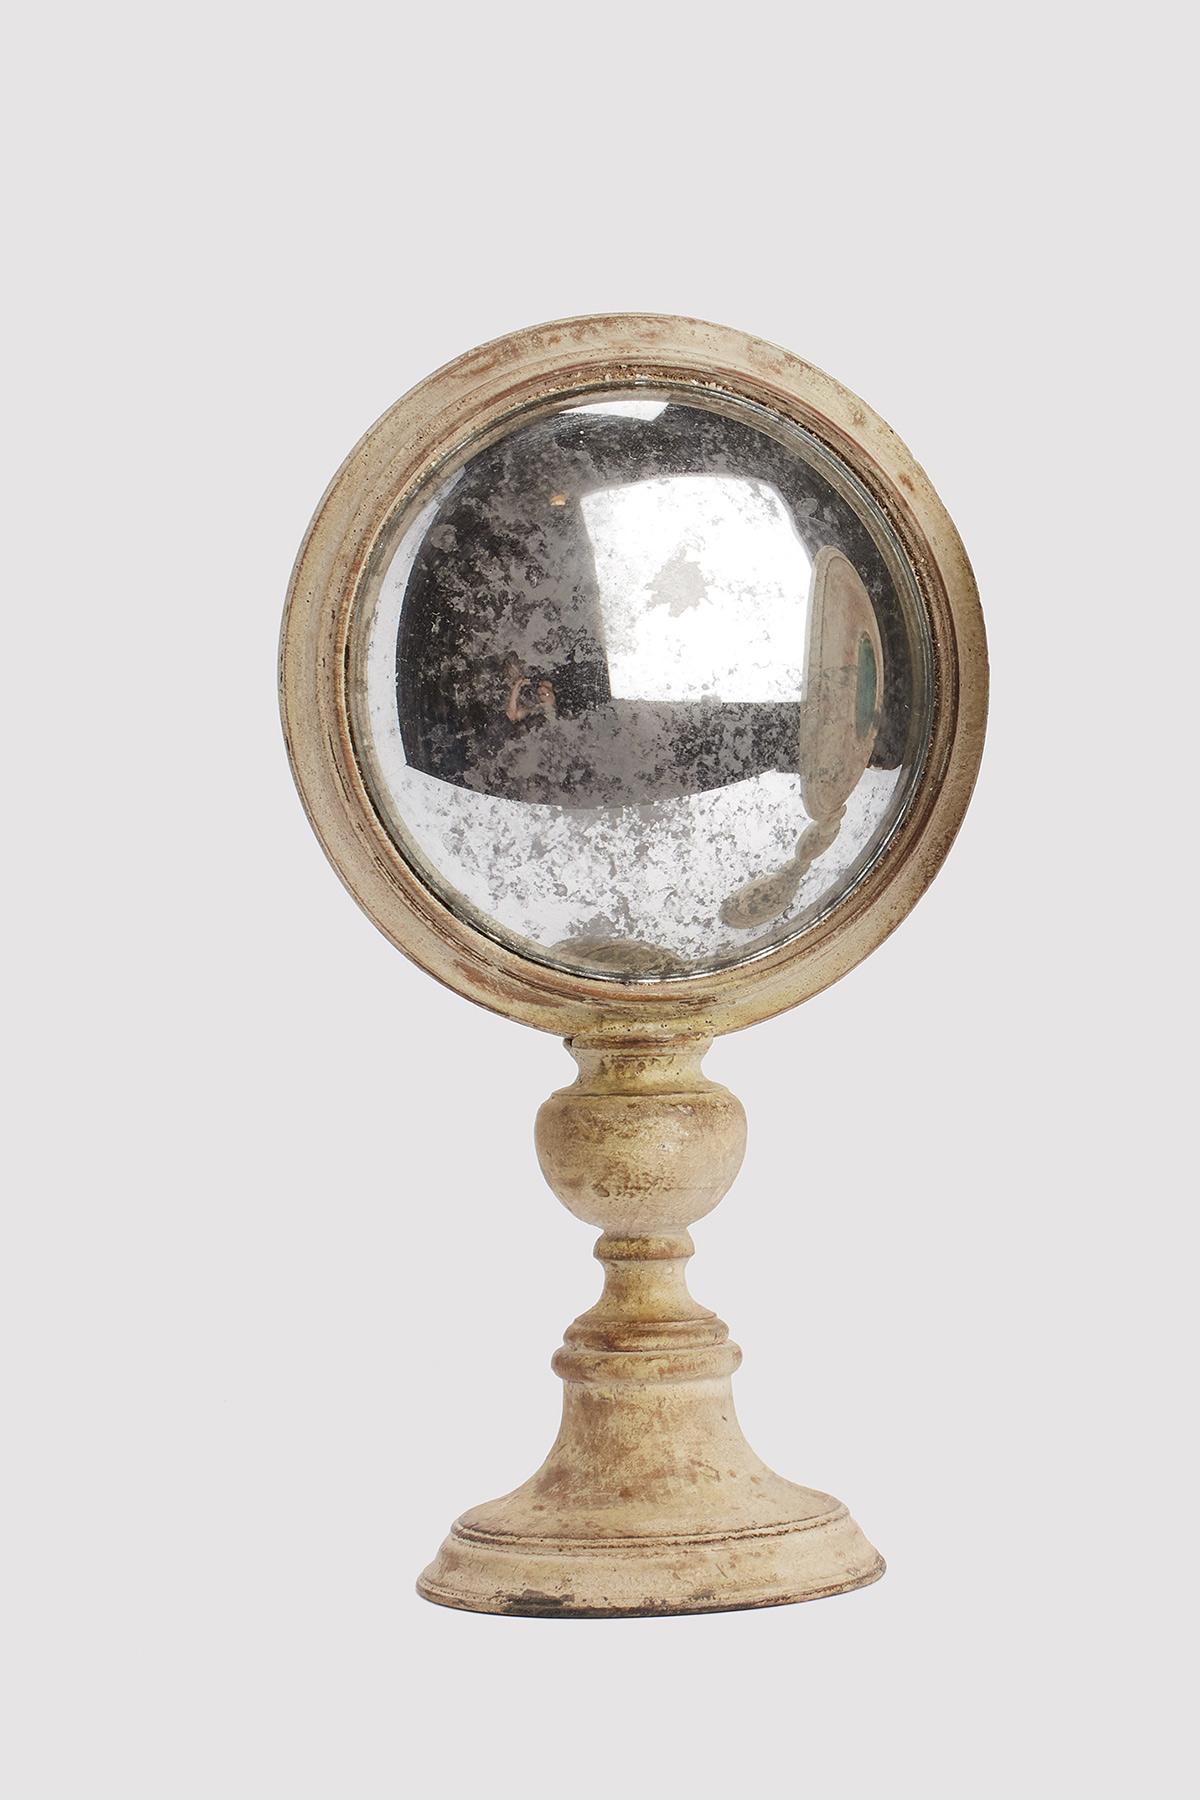 A Wunderkammer round curved mirror with white wooden frame, mounted over white wooden round base. On the rear of the frame there is one round malachite stone. Italy circa 1870.